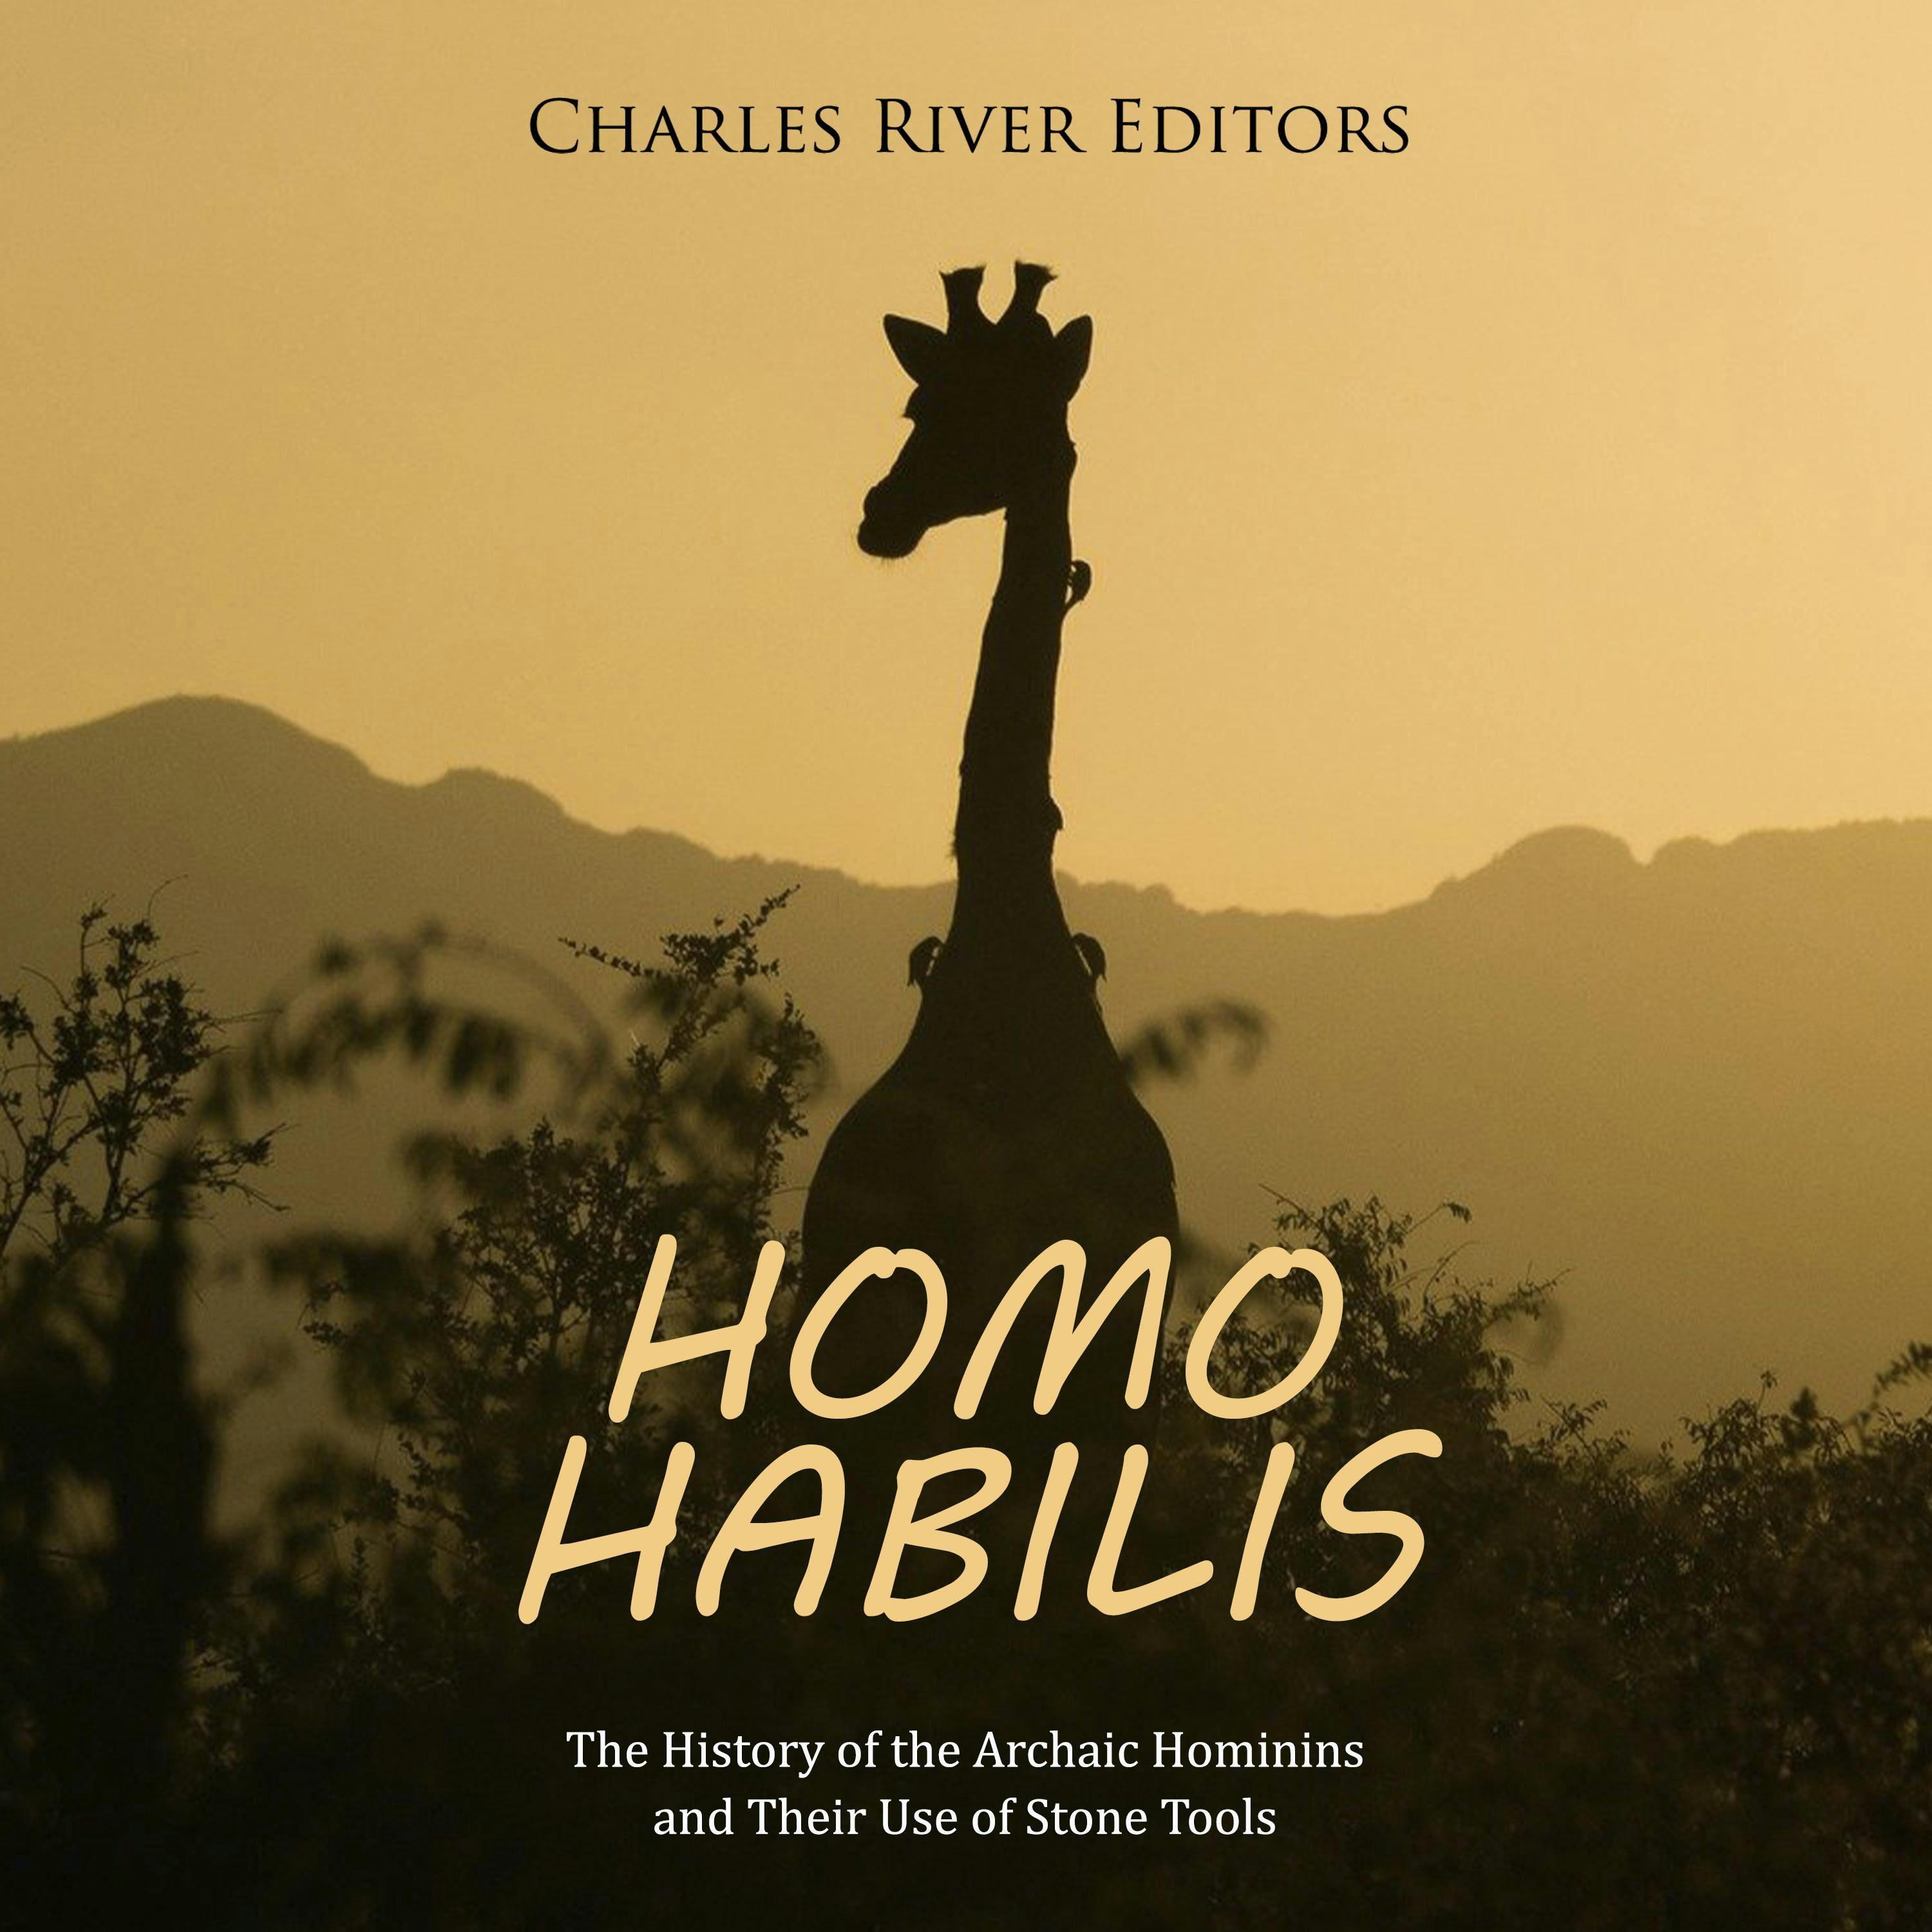 Homo habilis: The History of the Archaic Hominins and Their Use of Stone Tools - Charles River Editors